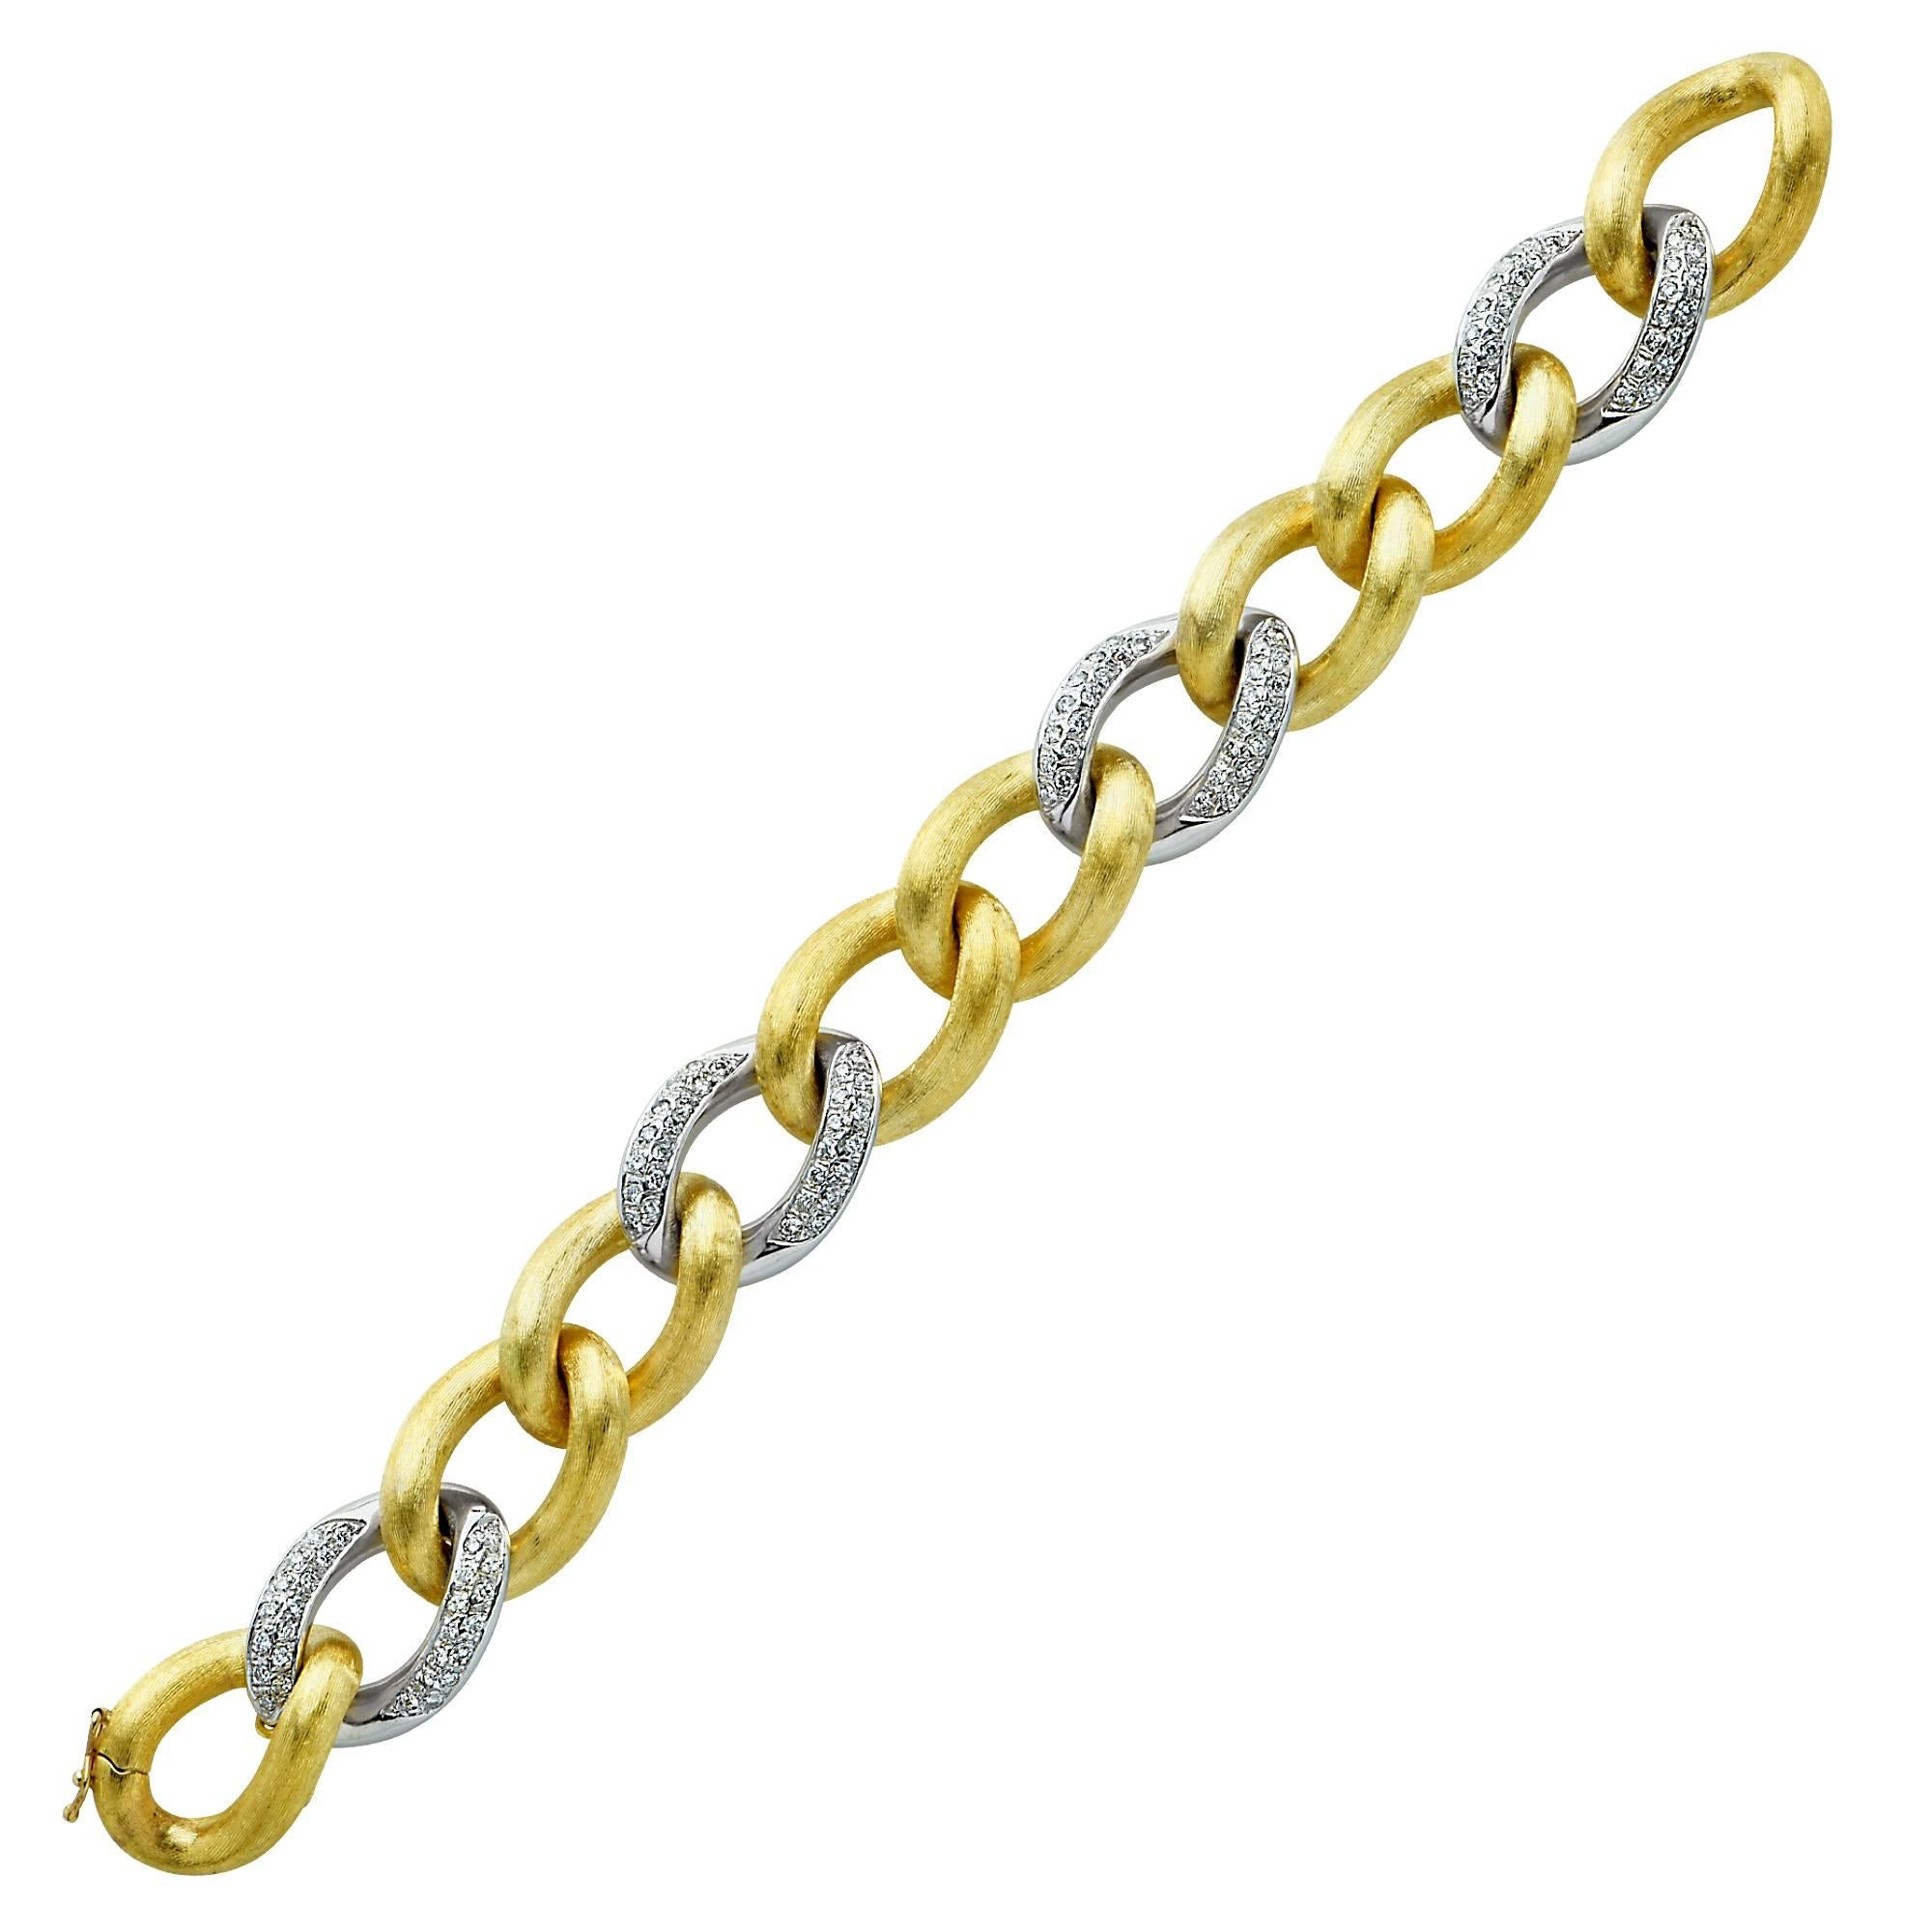 Crafted in Italy this bracelet is manufactured superbly, with great a heft, stunning textural quality and gleaming diamonds. Set in 18 karat two tone gold. The bracelet is adorned with 112 round brilliant cut diamonds, G color, VS1-2 clarity. This